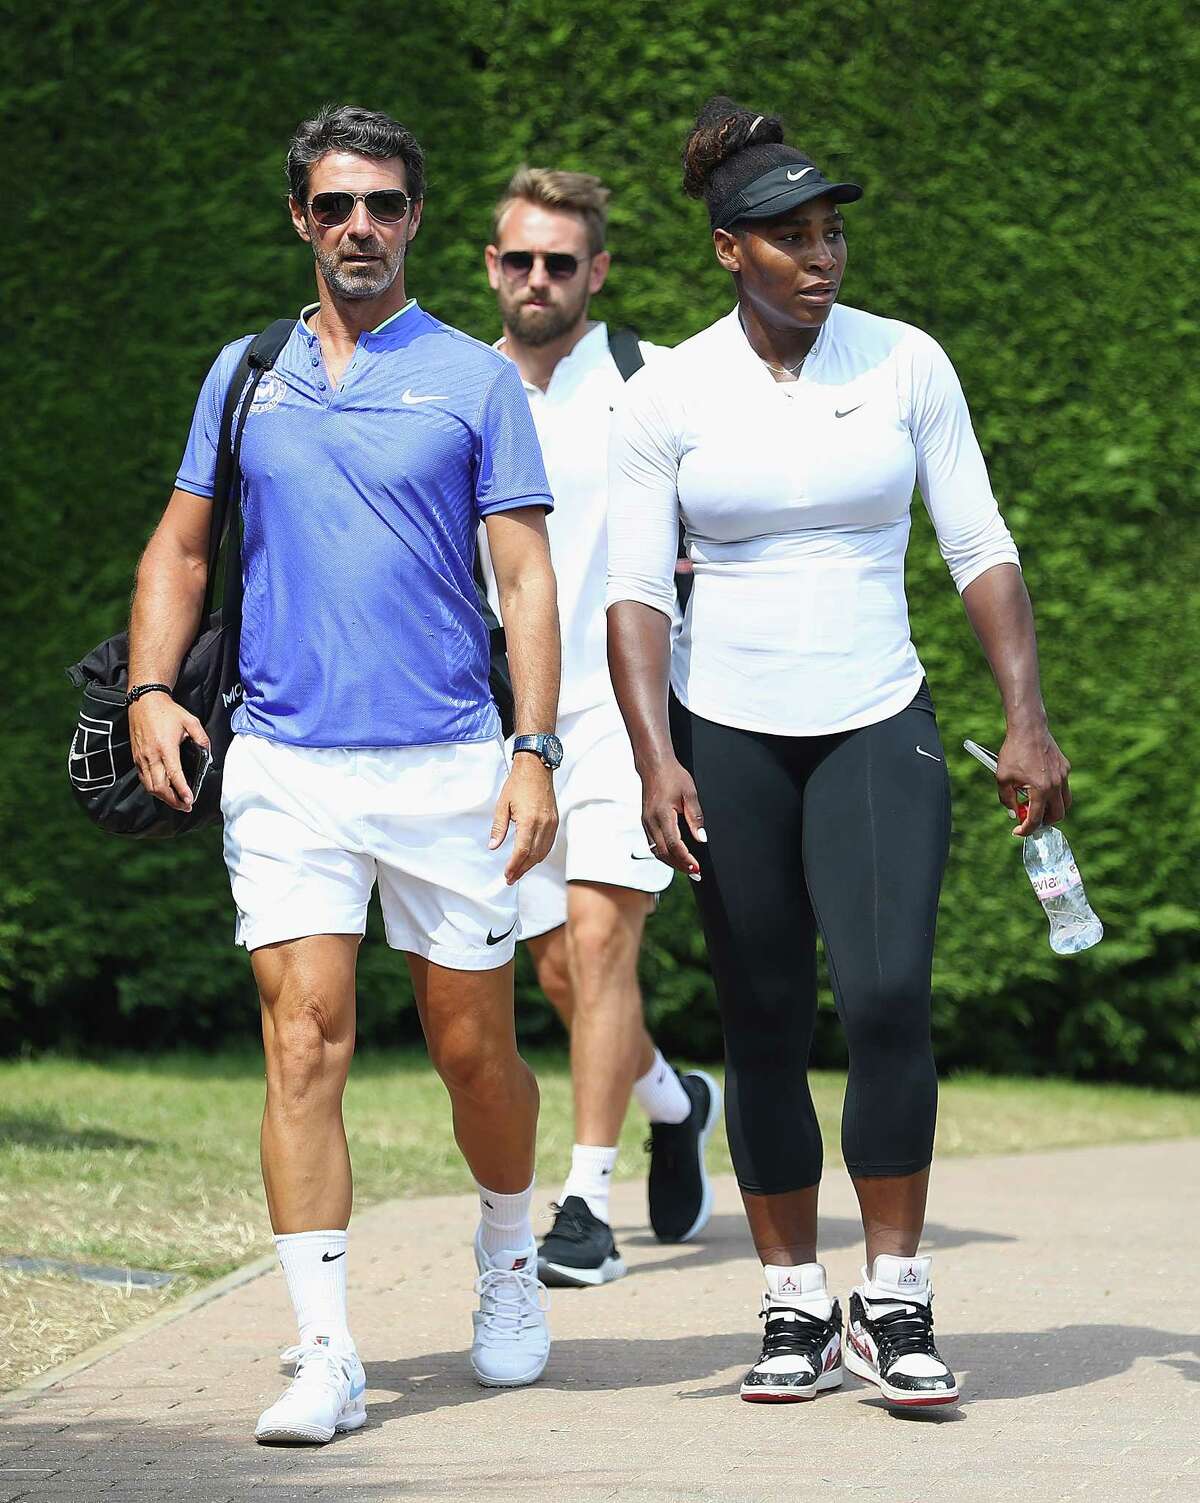 LONDON, ENGLAND - JULY 08: Serena Williams of the United States arrives for practise on the middle sunday ahead of the fourth round at All England Lawn Tennis and Croquet Club on July 8, 2018 in London, England. (Photo by Matthew Lewis/Getty Images)